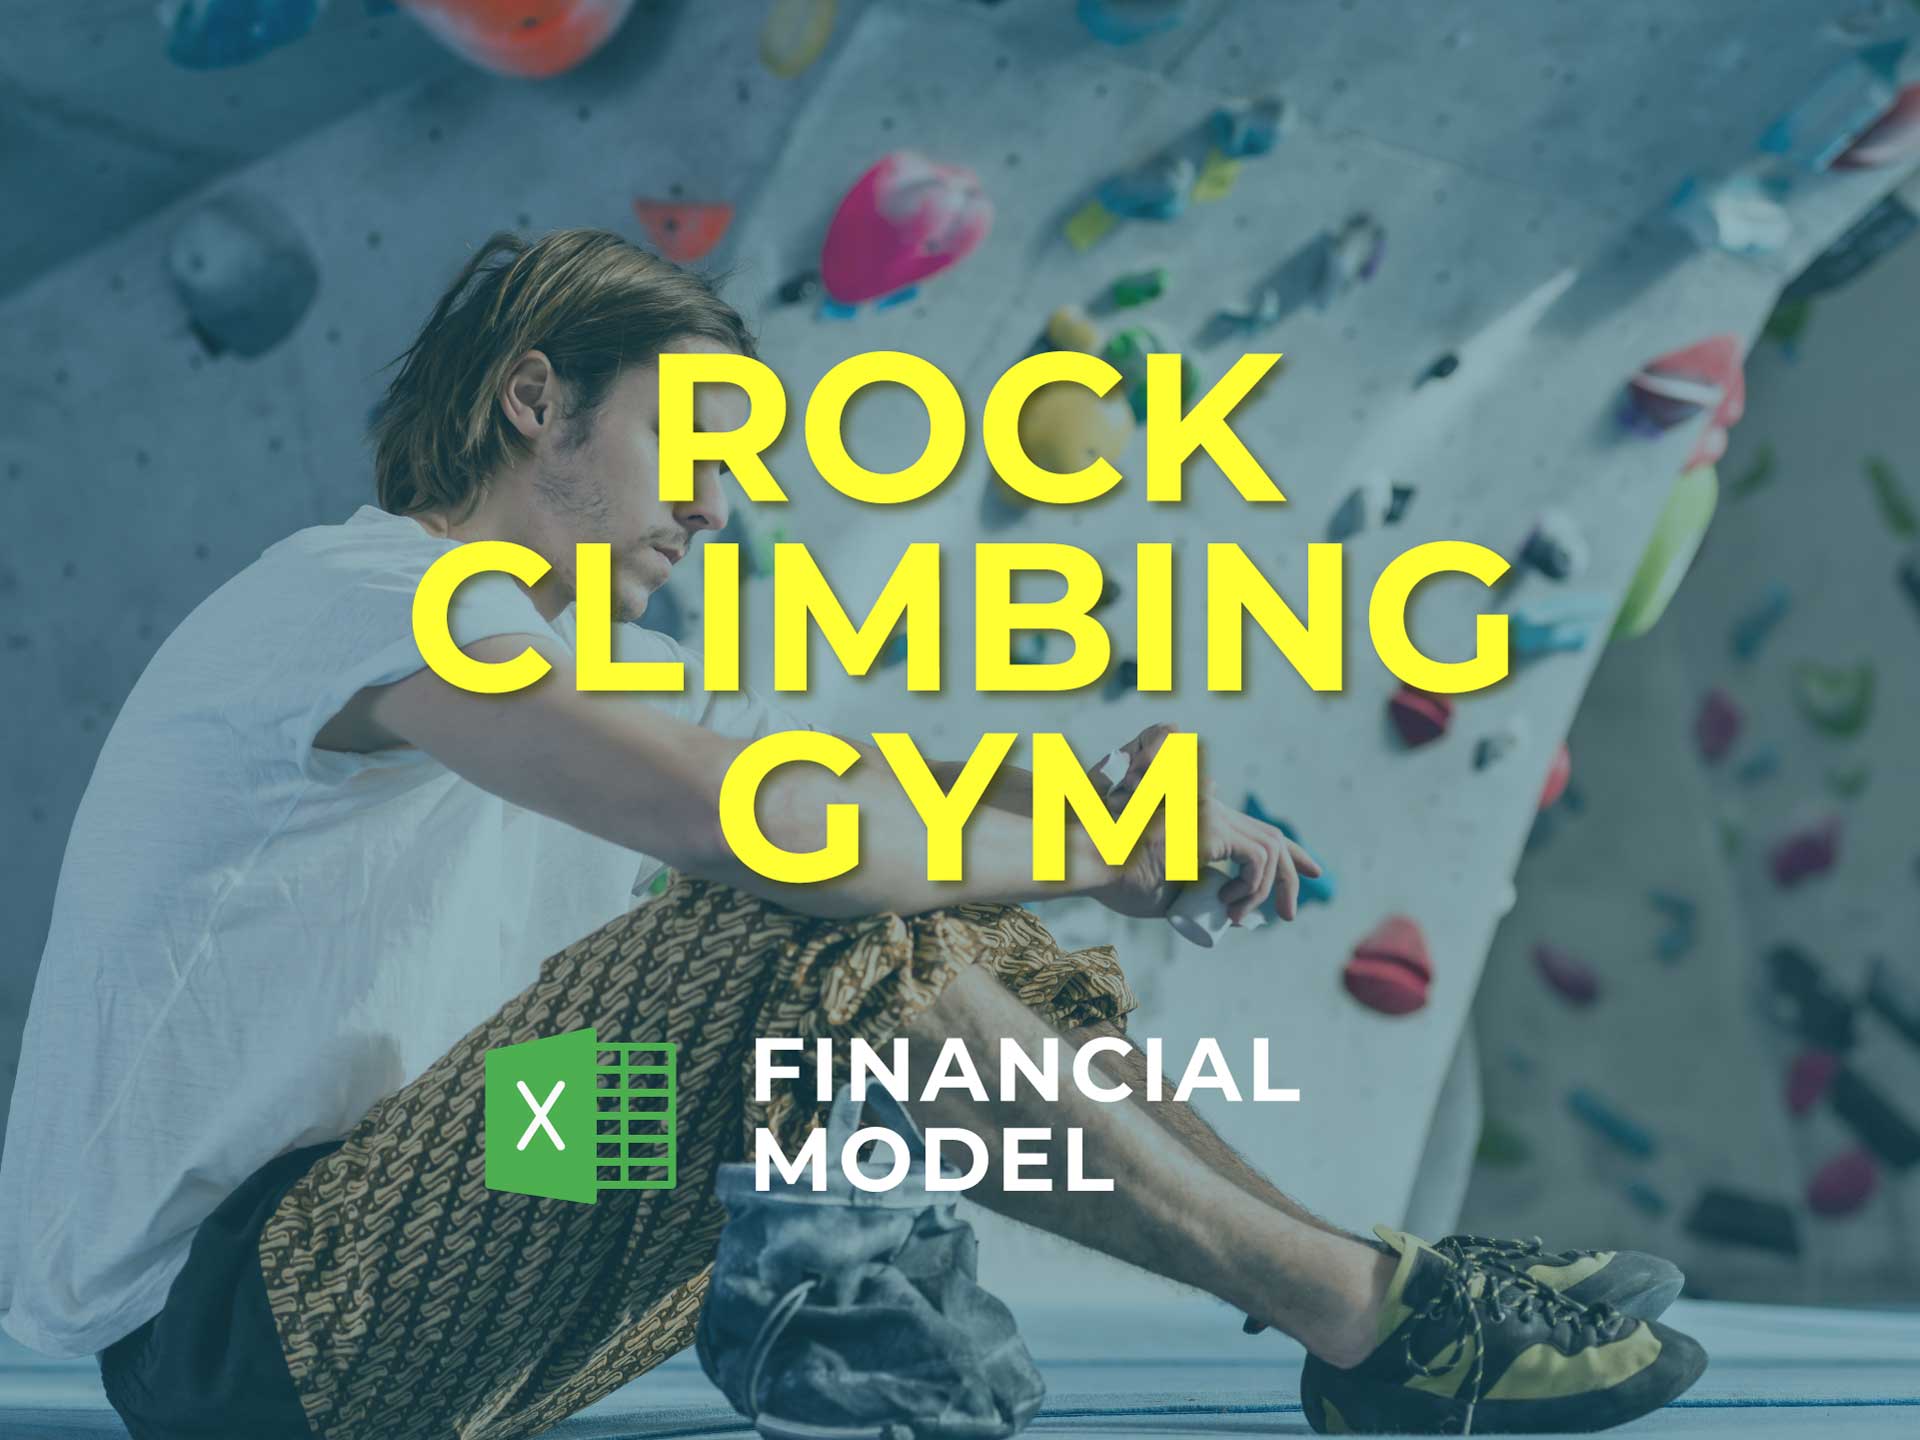 business plan for rock climbing gym